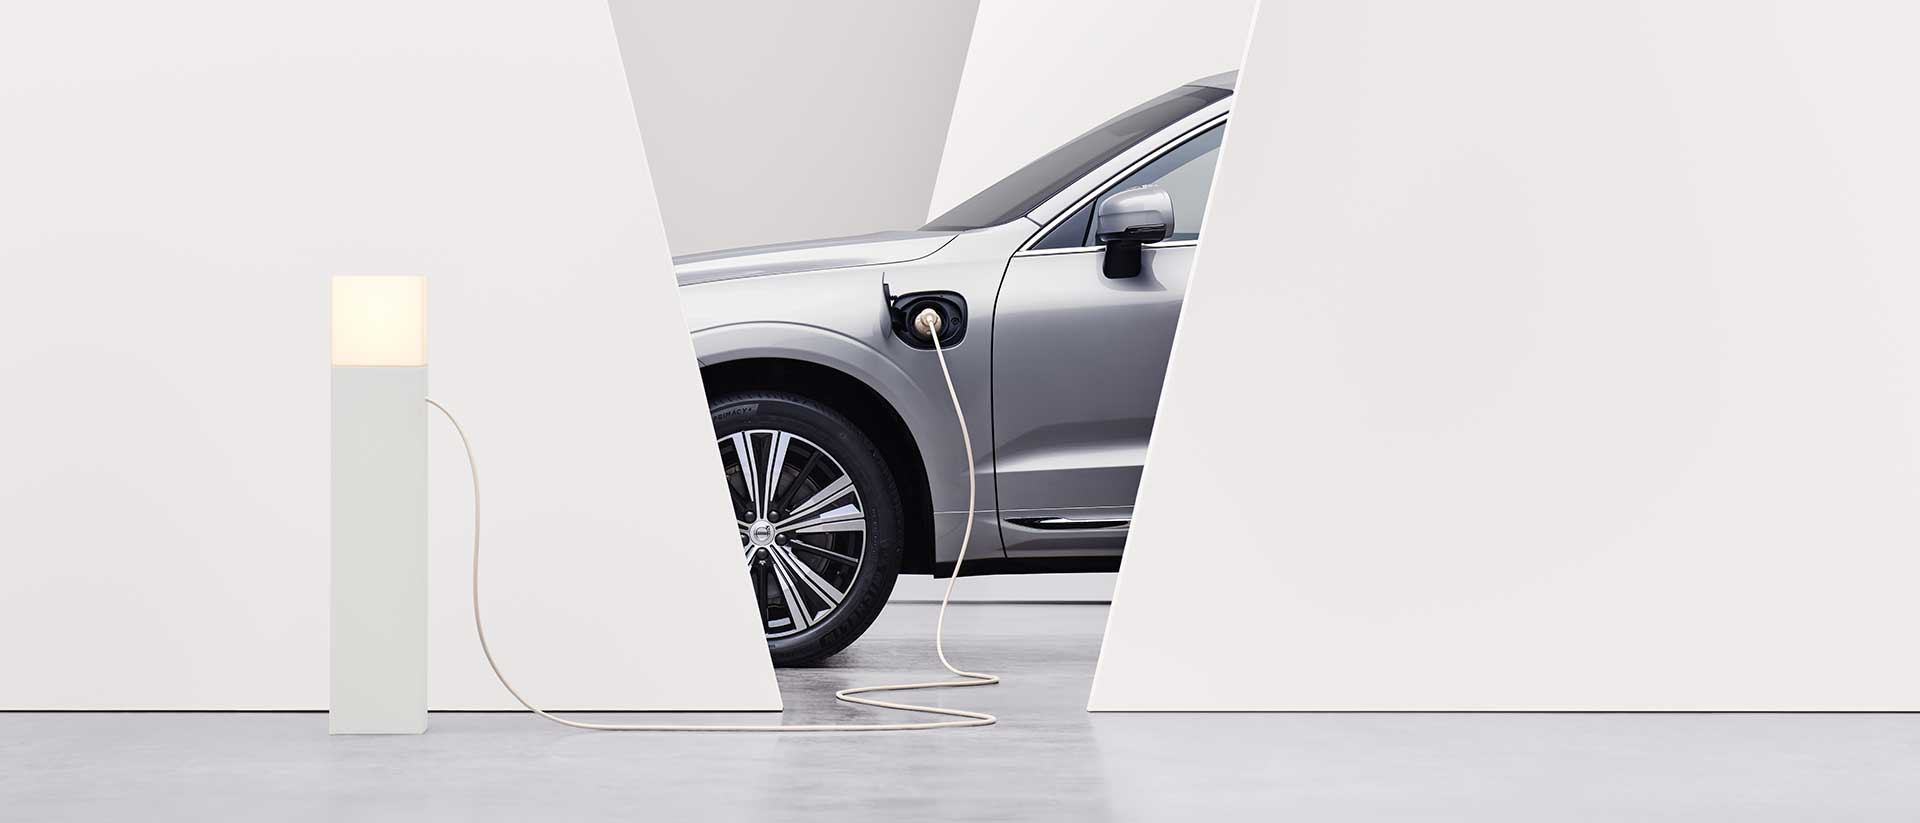 A Volvo car gets charged at a charging station.